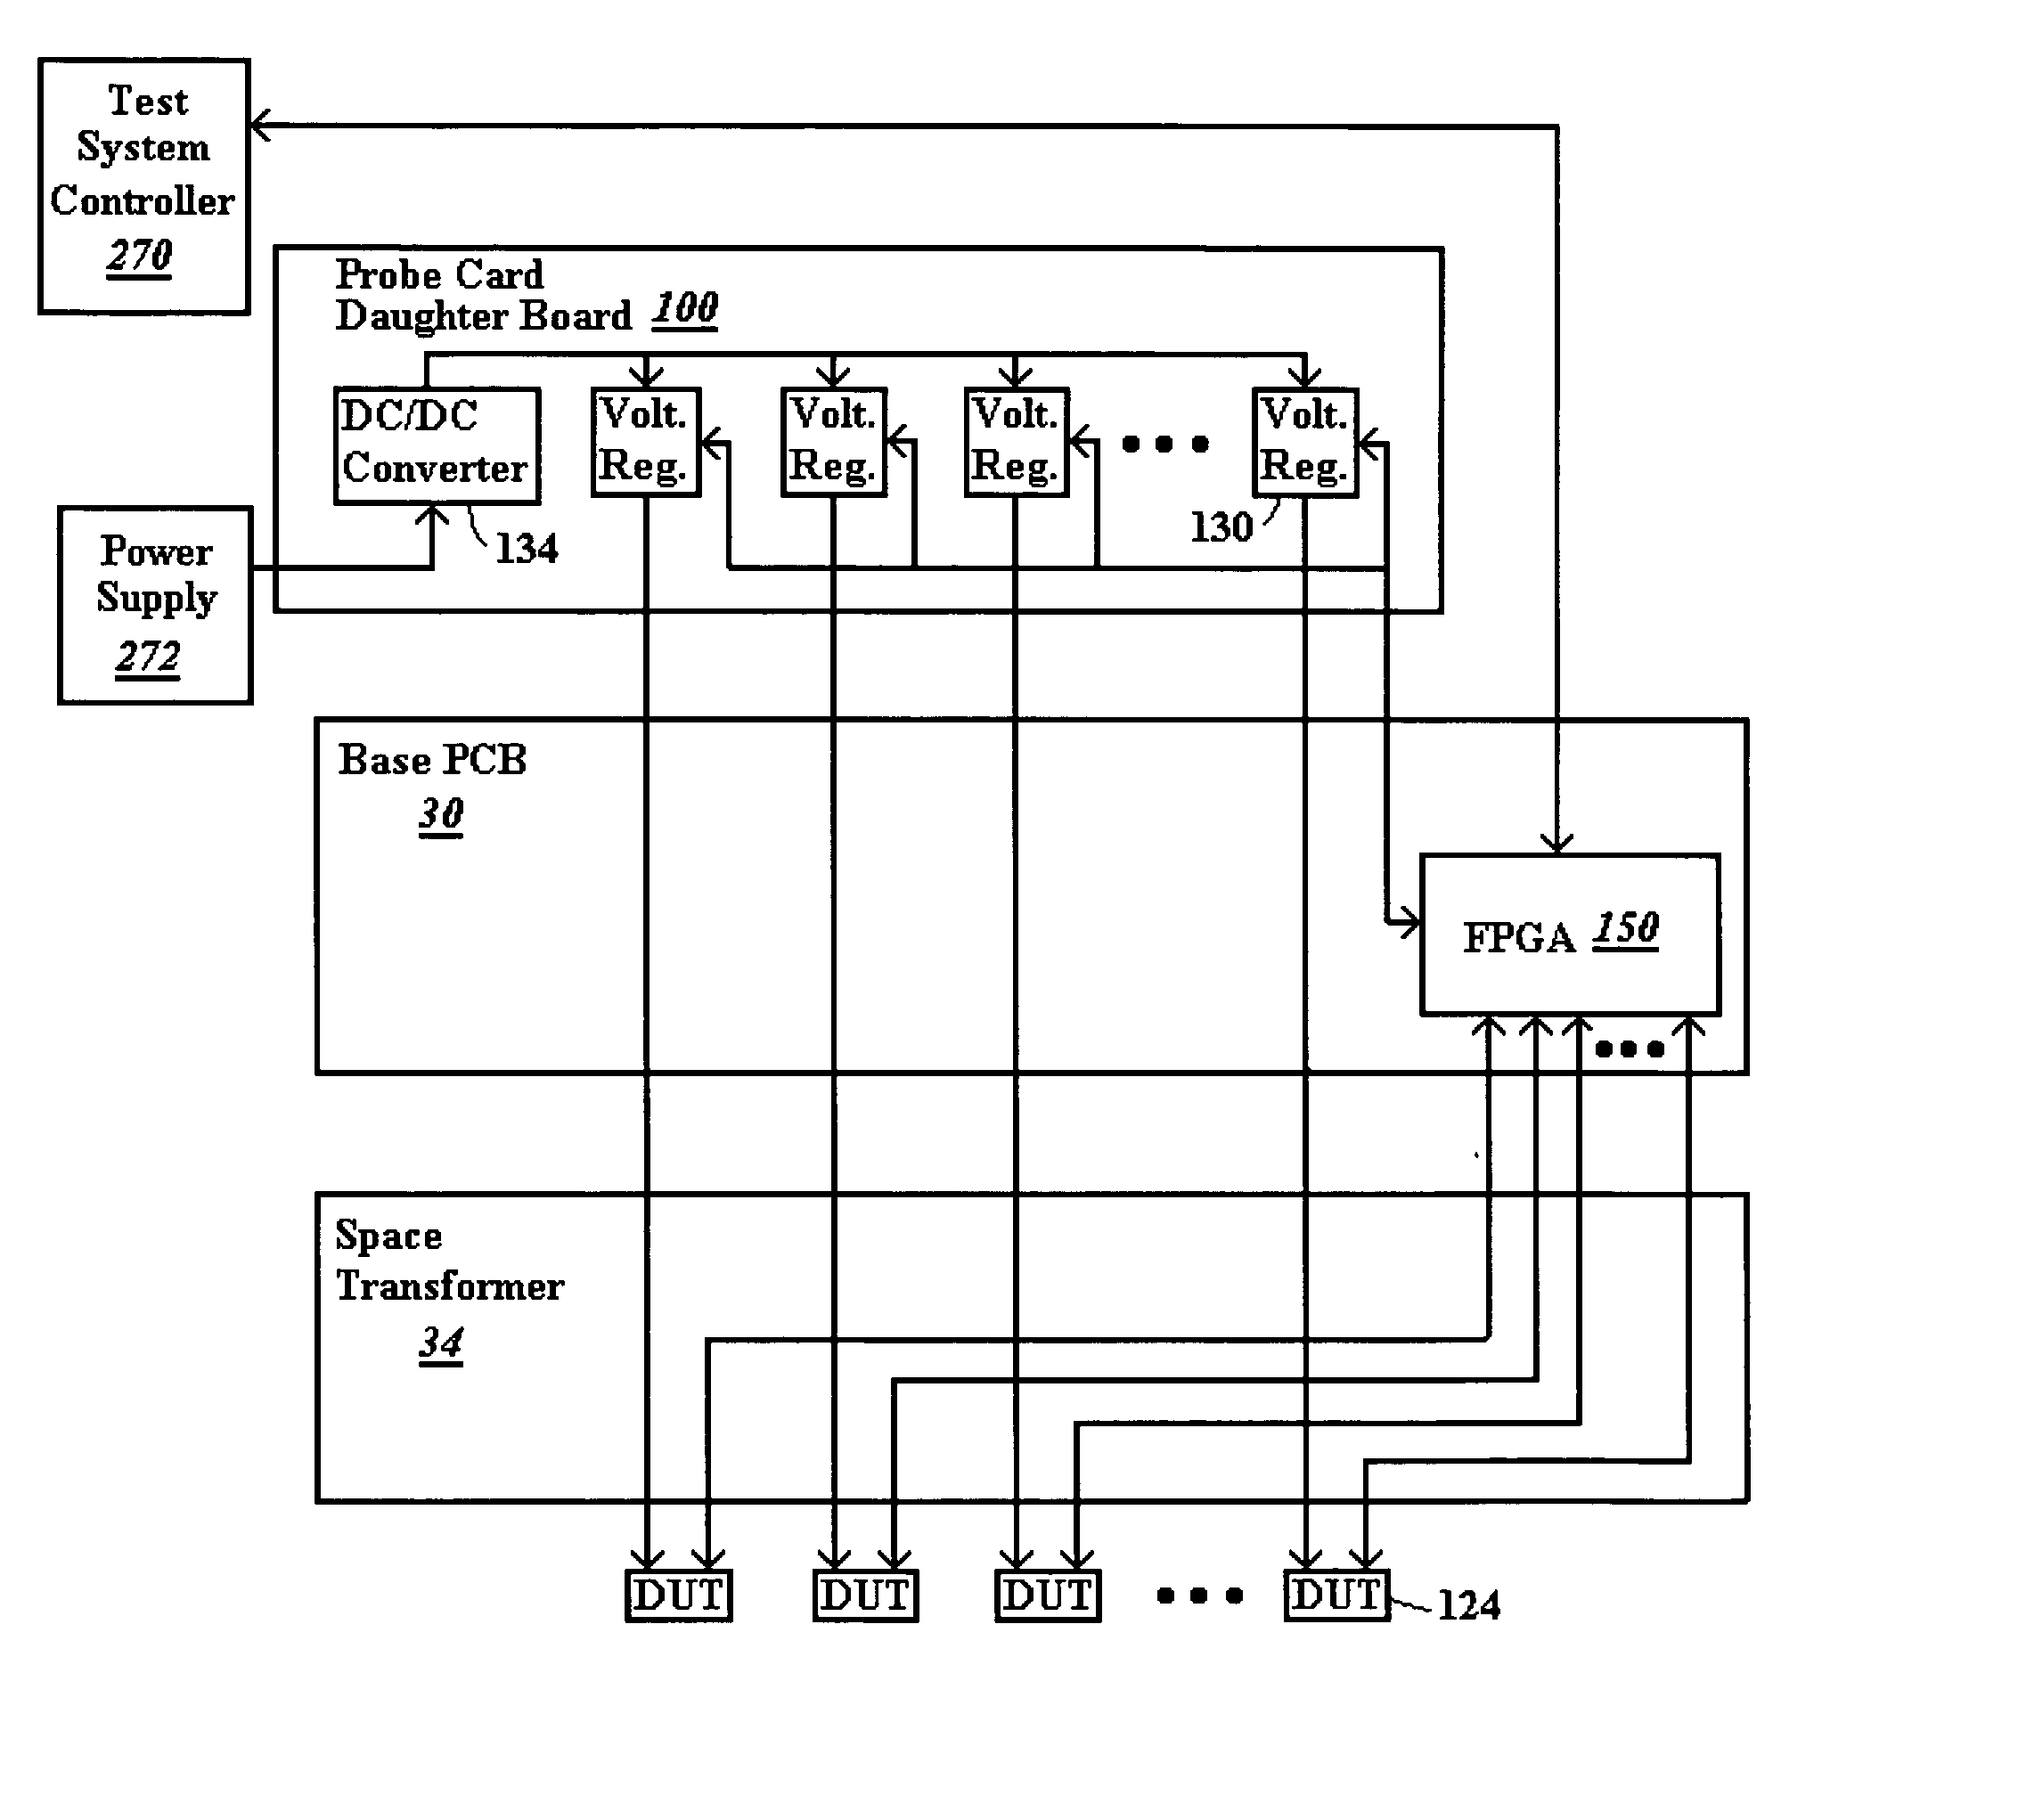 Method of designing an application specific probe card test system